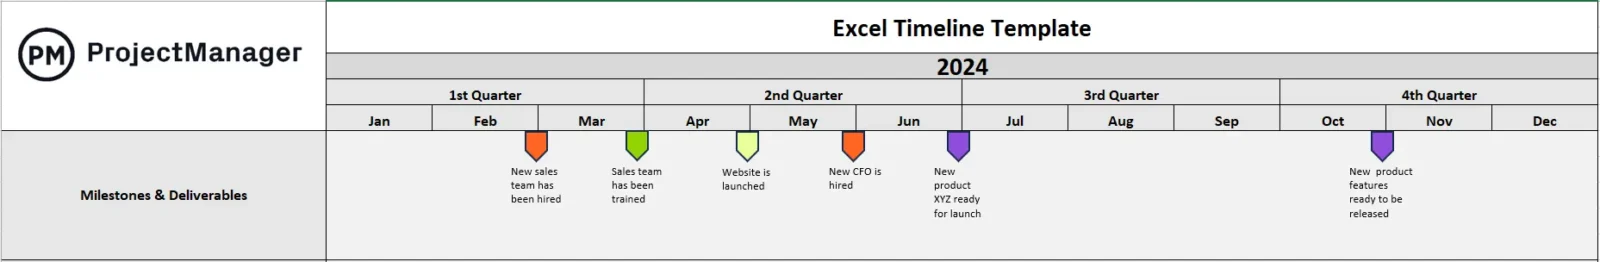 Milestones and deliverable row in ProjectManager's Excel timeline template